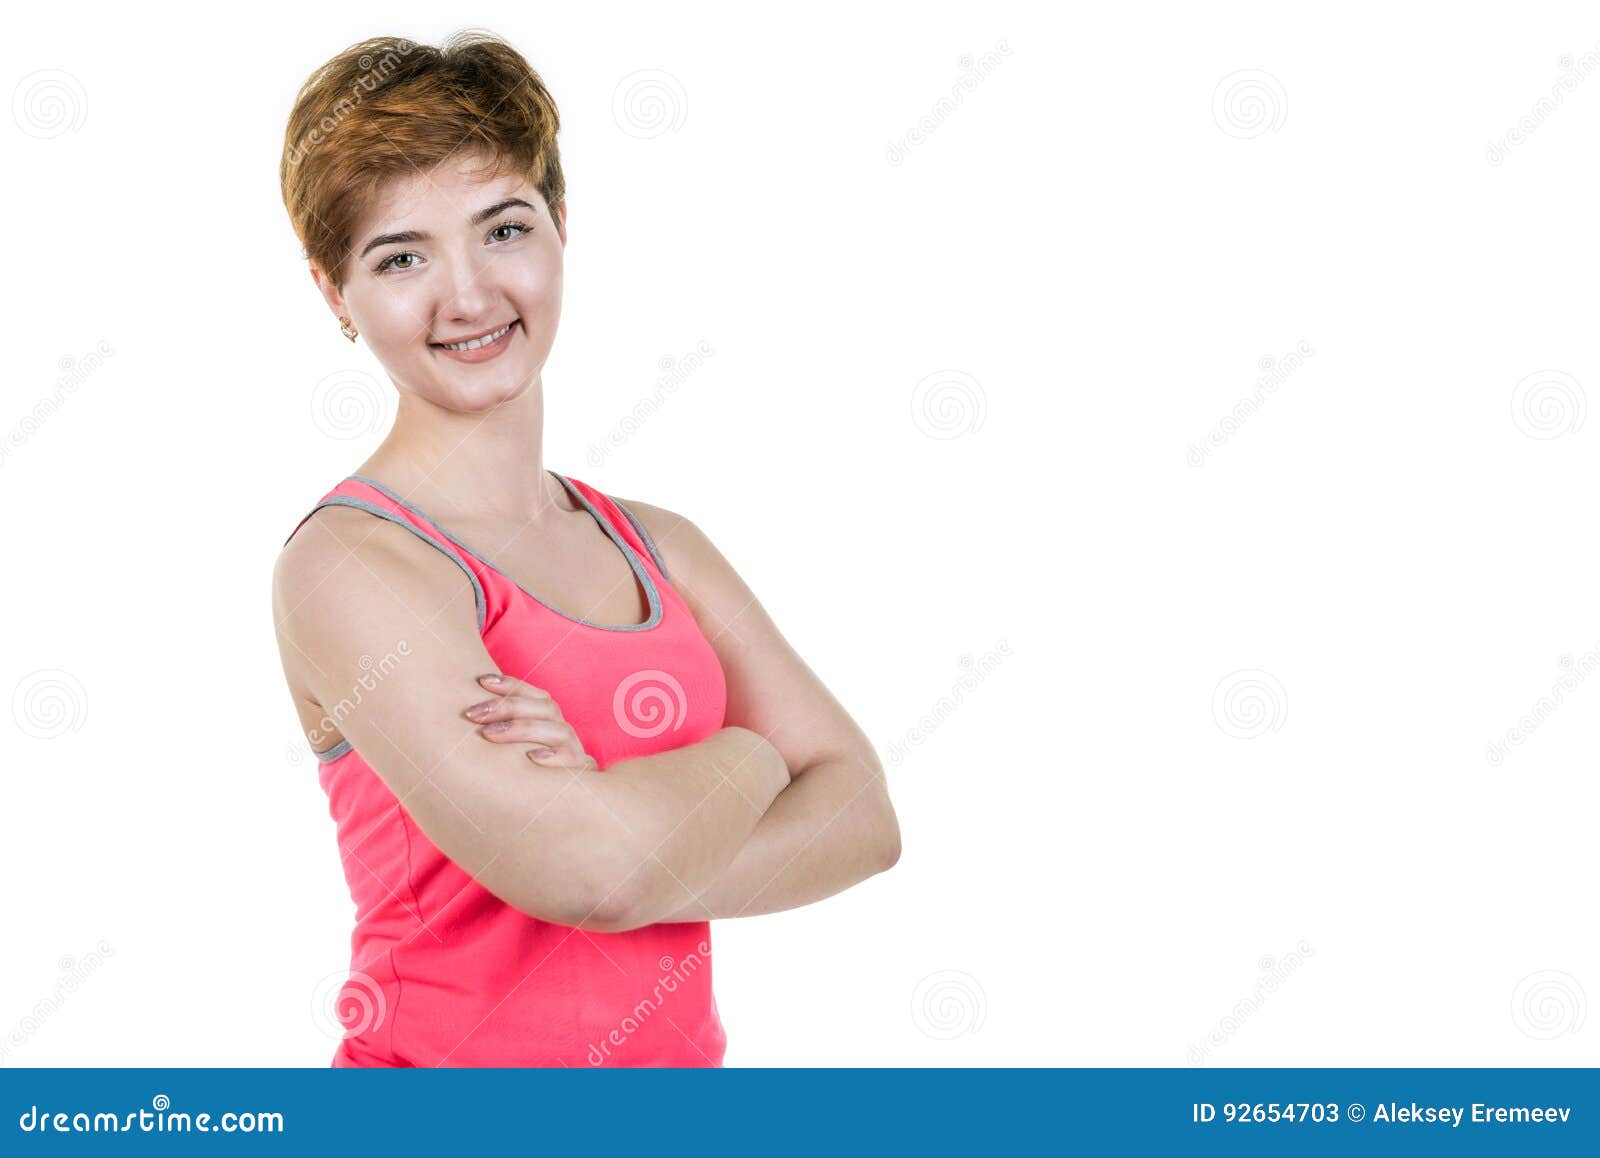 Young Girl Short Hair Style Smiling Left Side Frame White Isolated  Background Place Inscription Stock Photos - Free & Royalty-Free Stock Photos  from Dreamstime